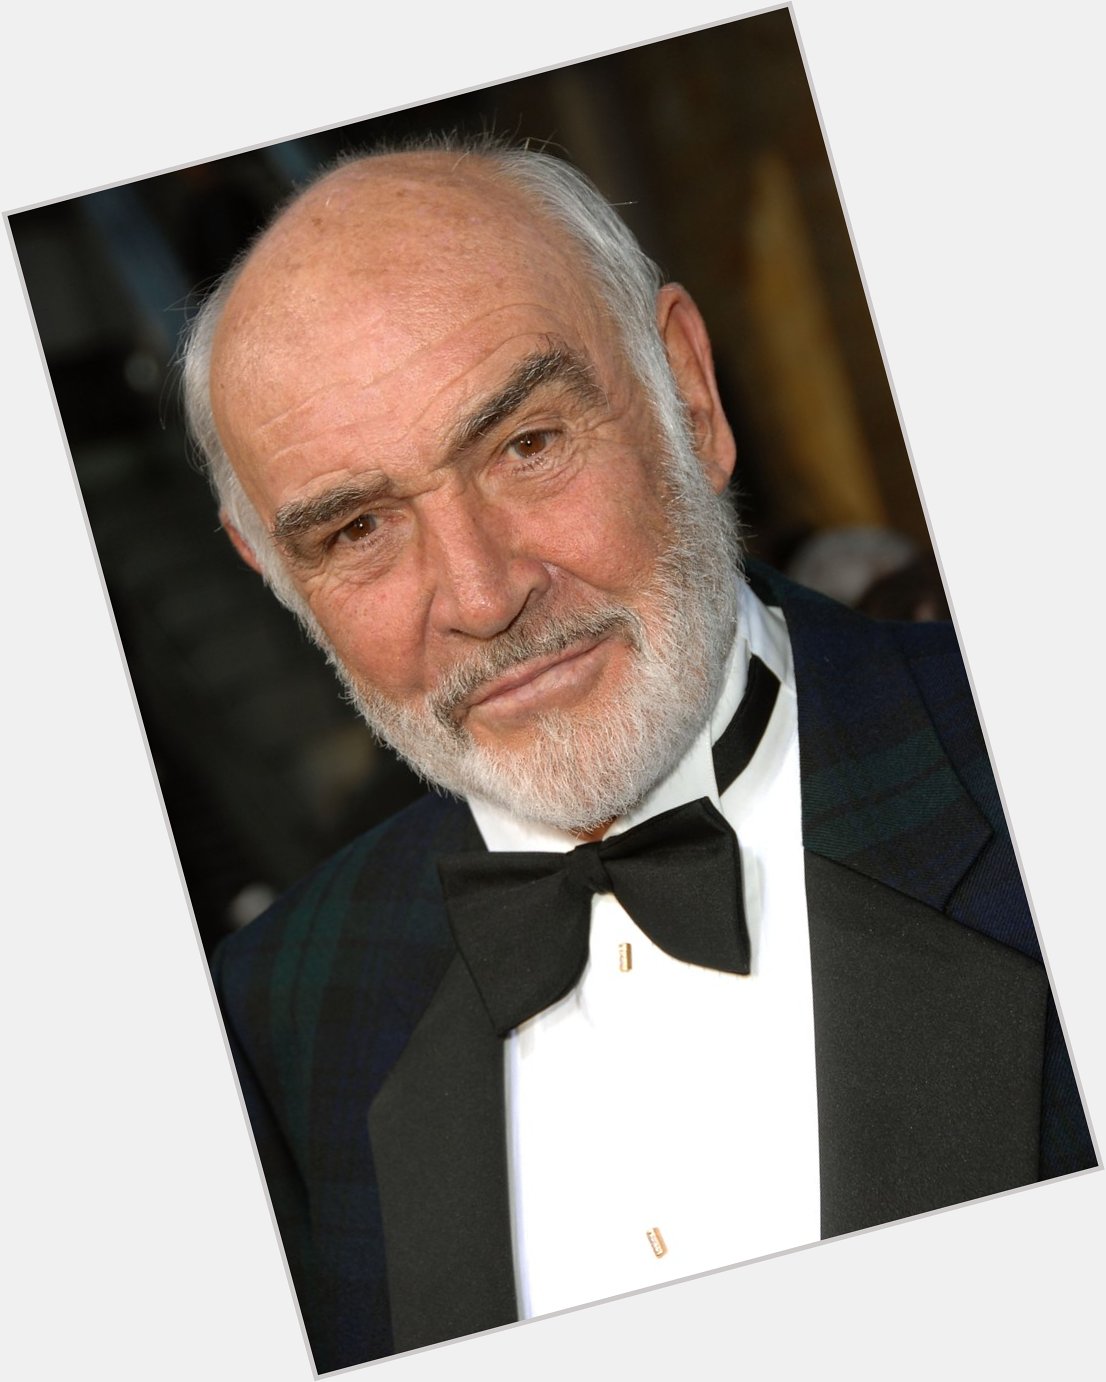 Happy birthday to the legendary Sean Connery, who turns 90 years old today. 